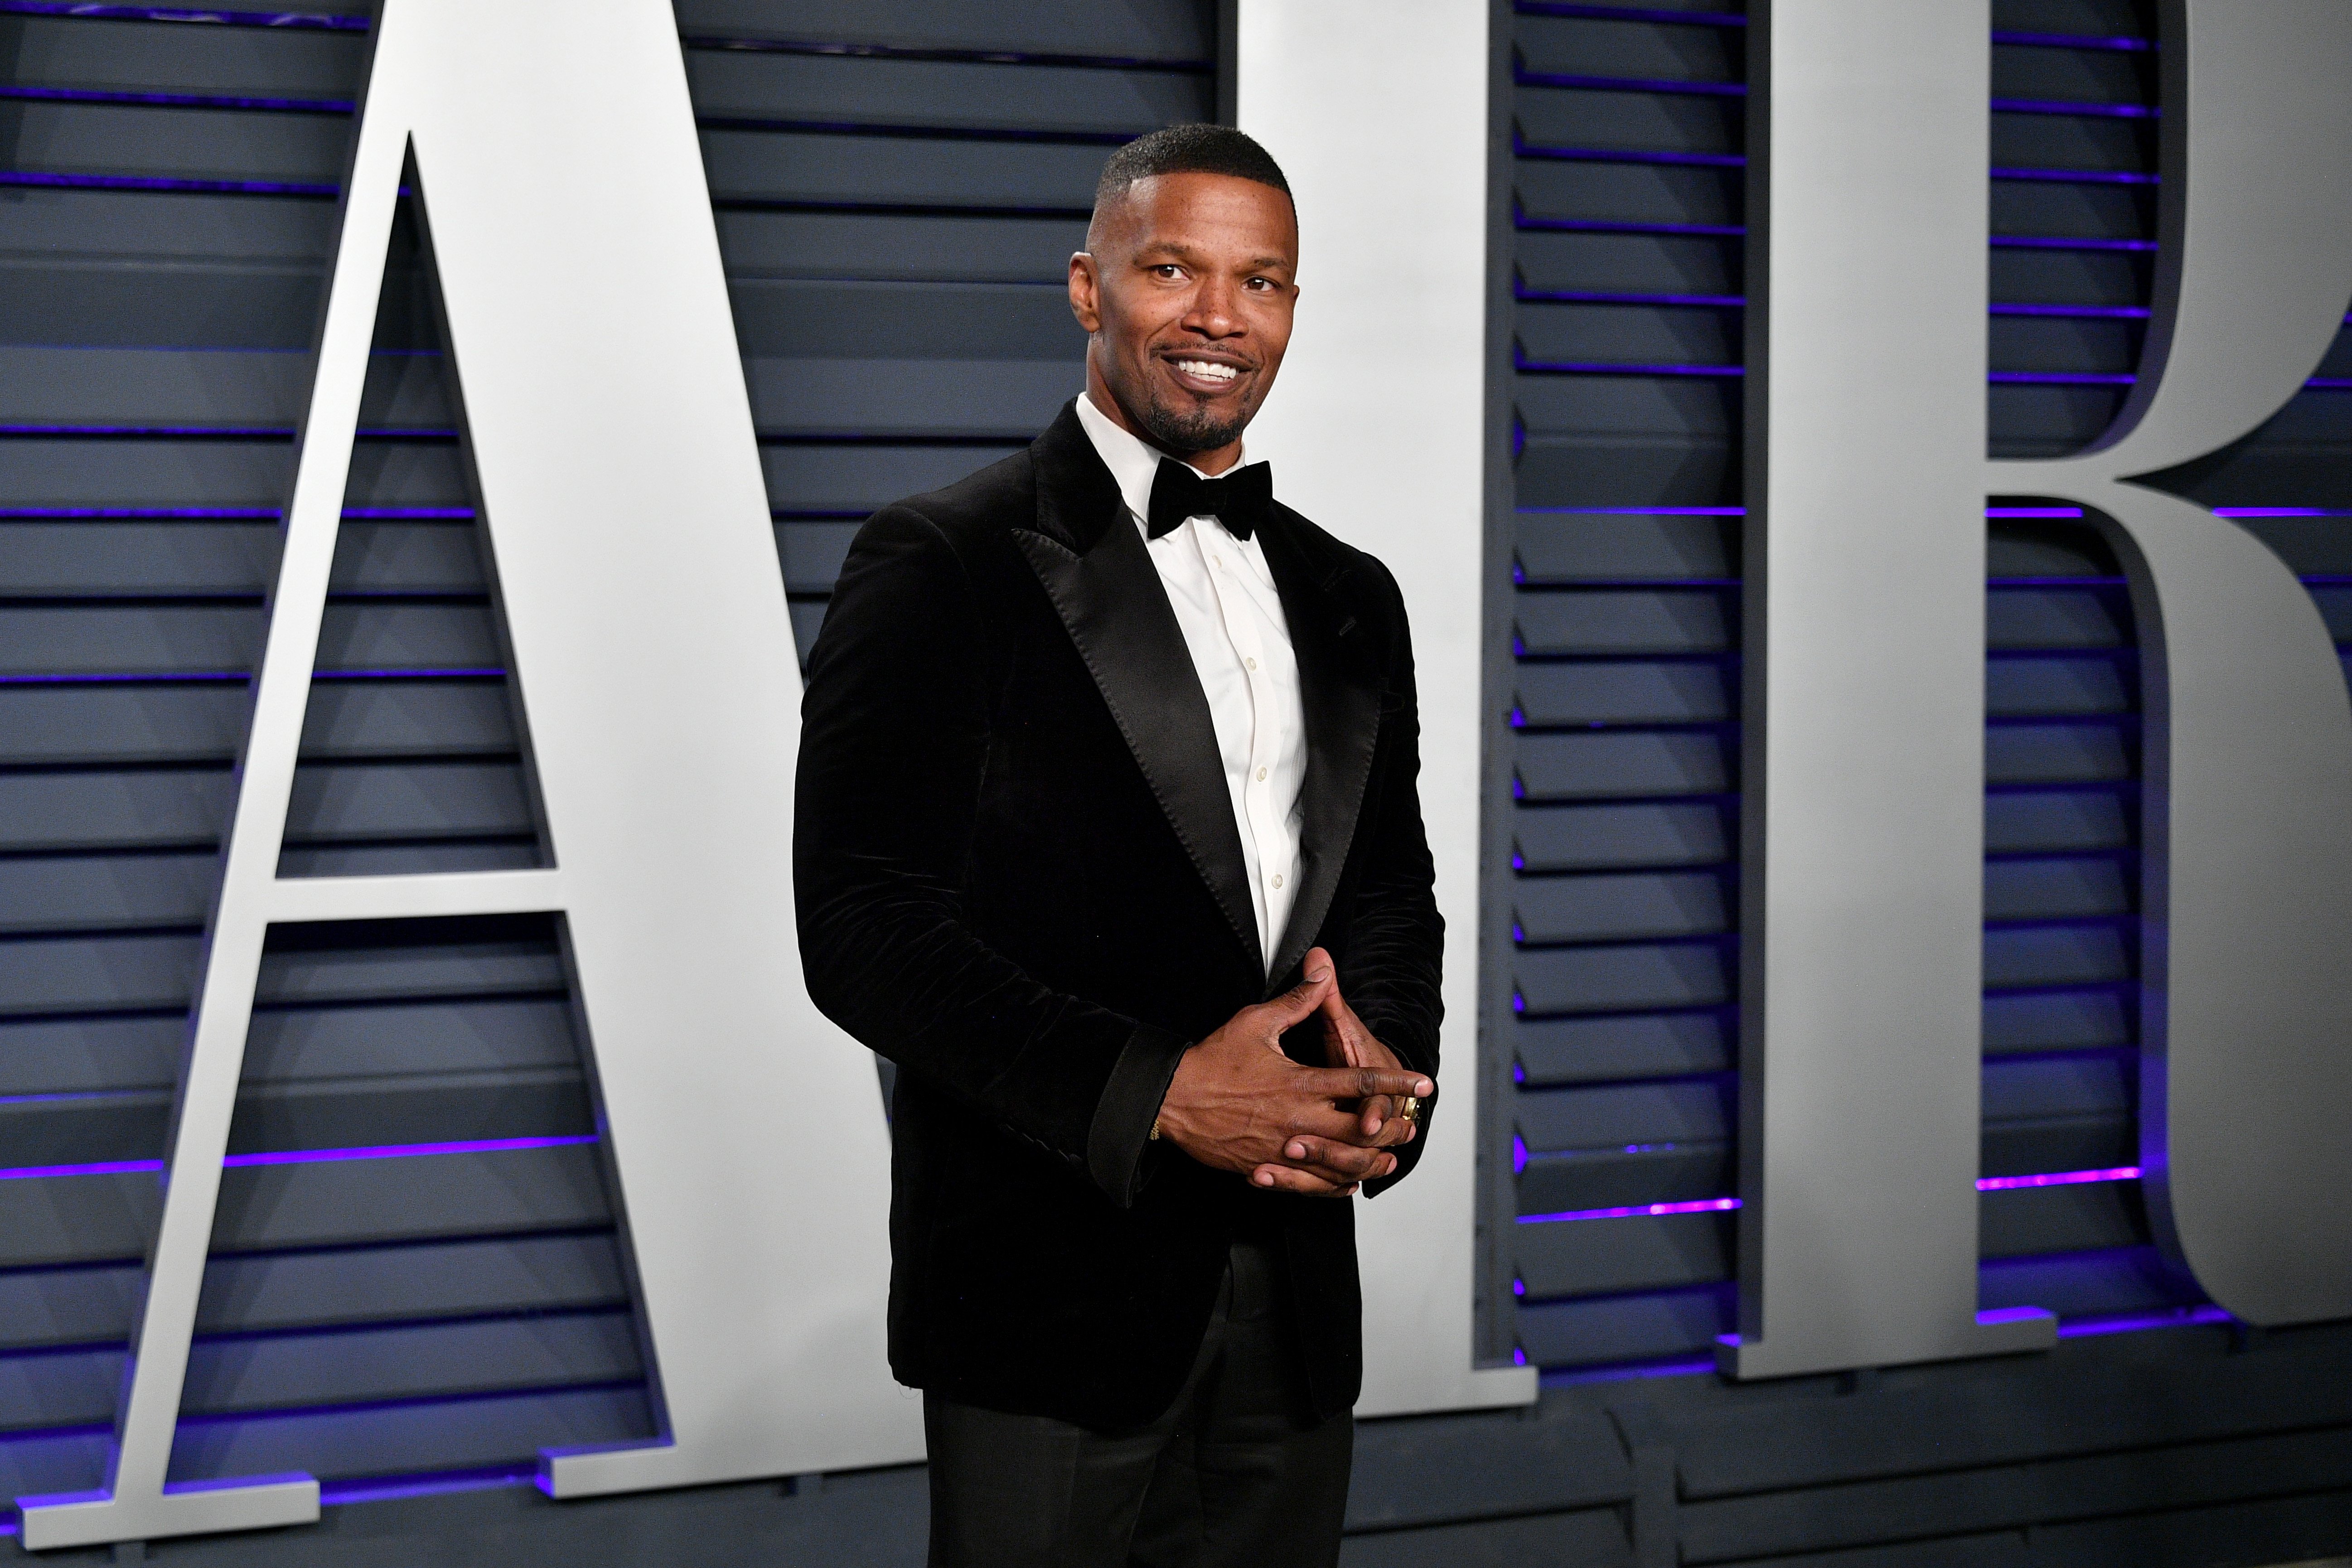 Jamie Foxx attends the 2019 Vanity Fair Oscar Party on February 24, 2019 in Beverly Hills, California. | Photo: Getty Images